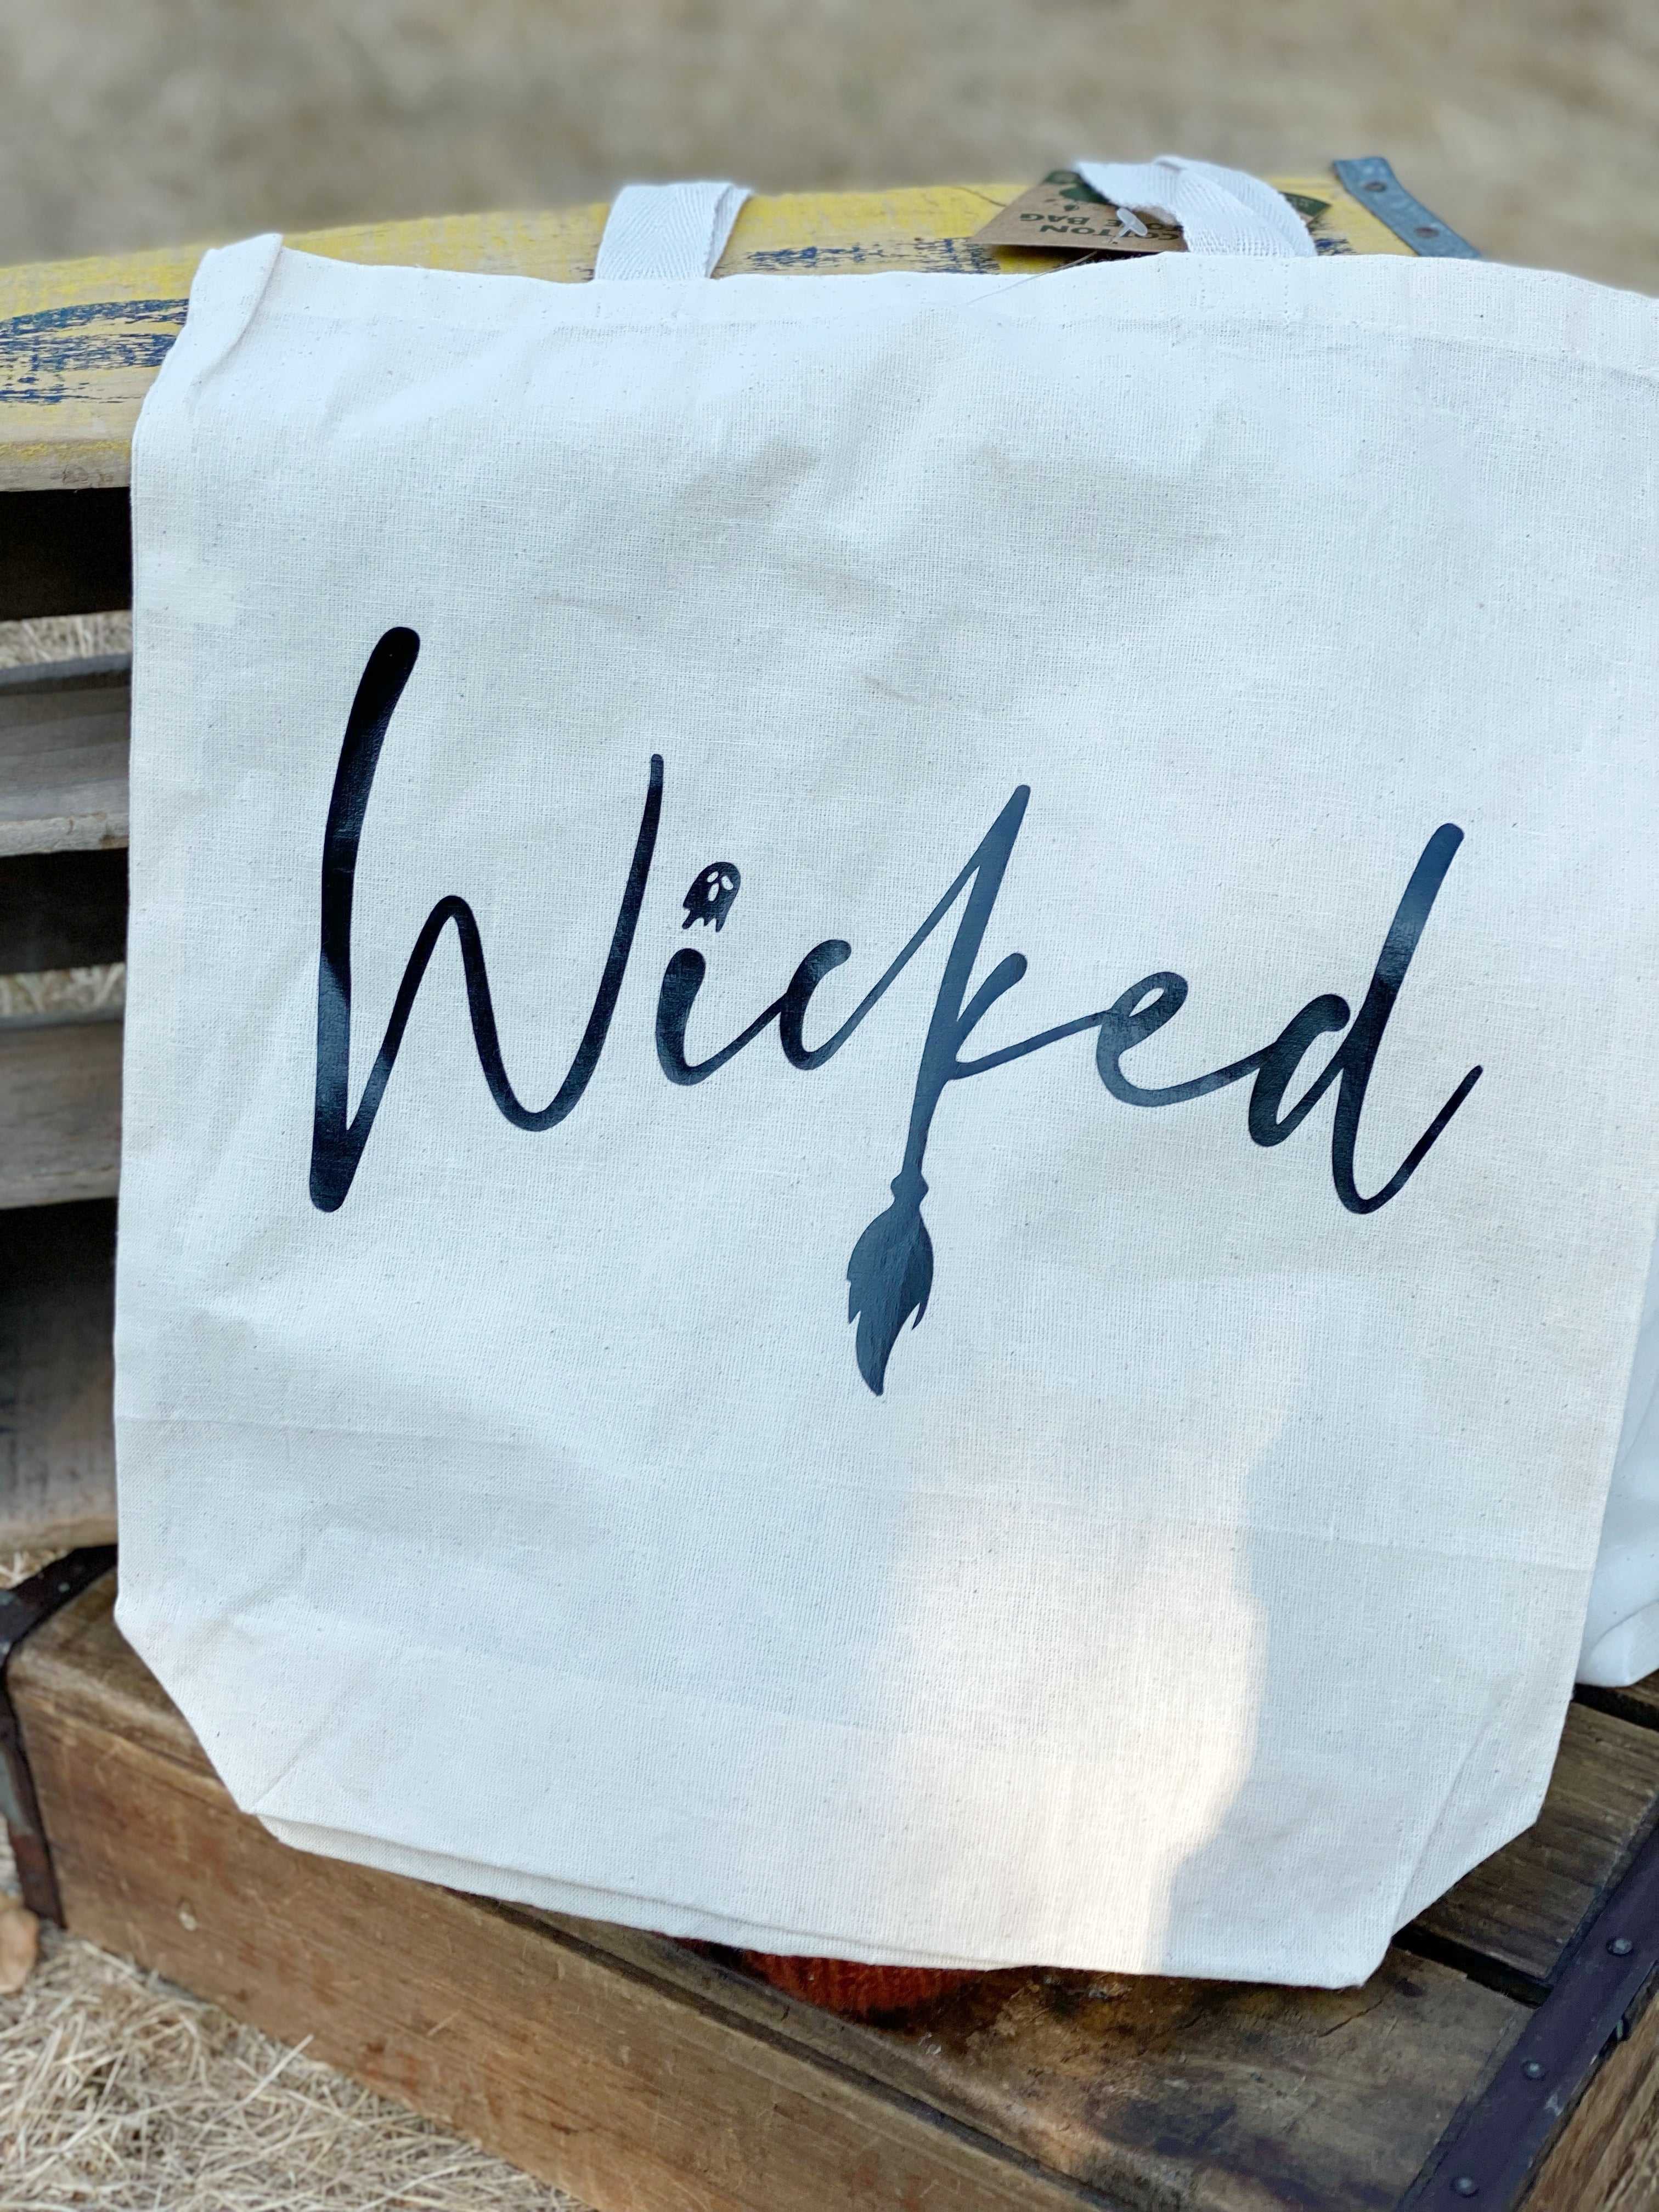 Wicked Cotton Tote Bag, Lightweight Thin Natural Cotton Tote Bag, Wicked Reusable Tote Bag, Halloween Tote, Farmers Market Bag